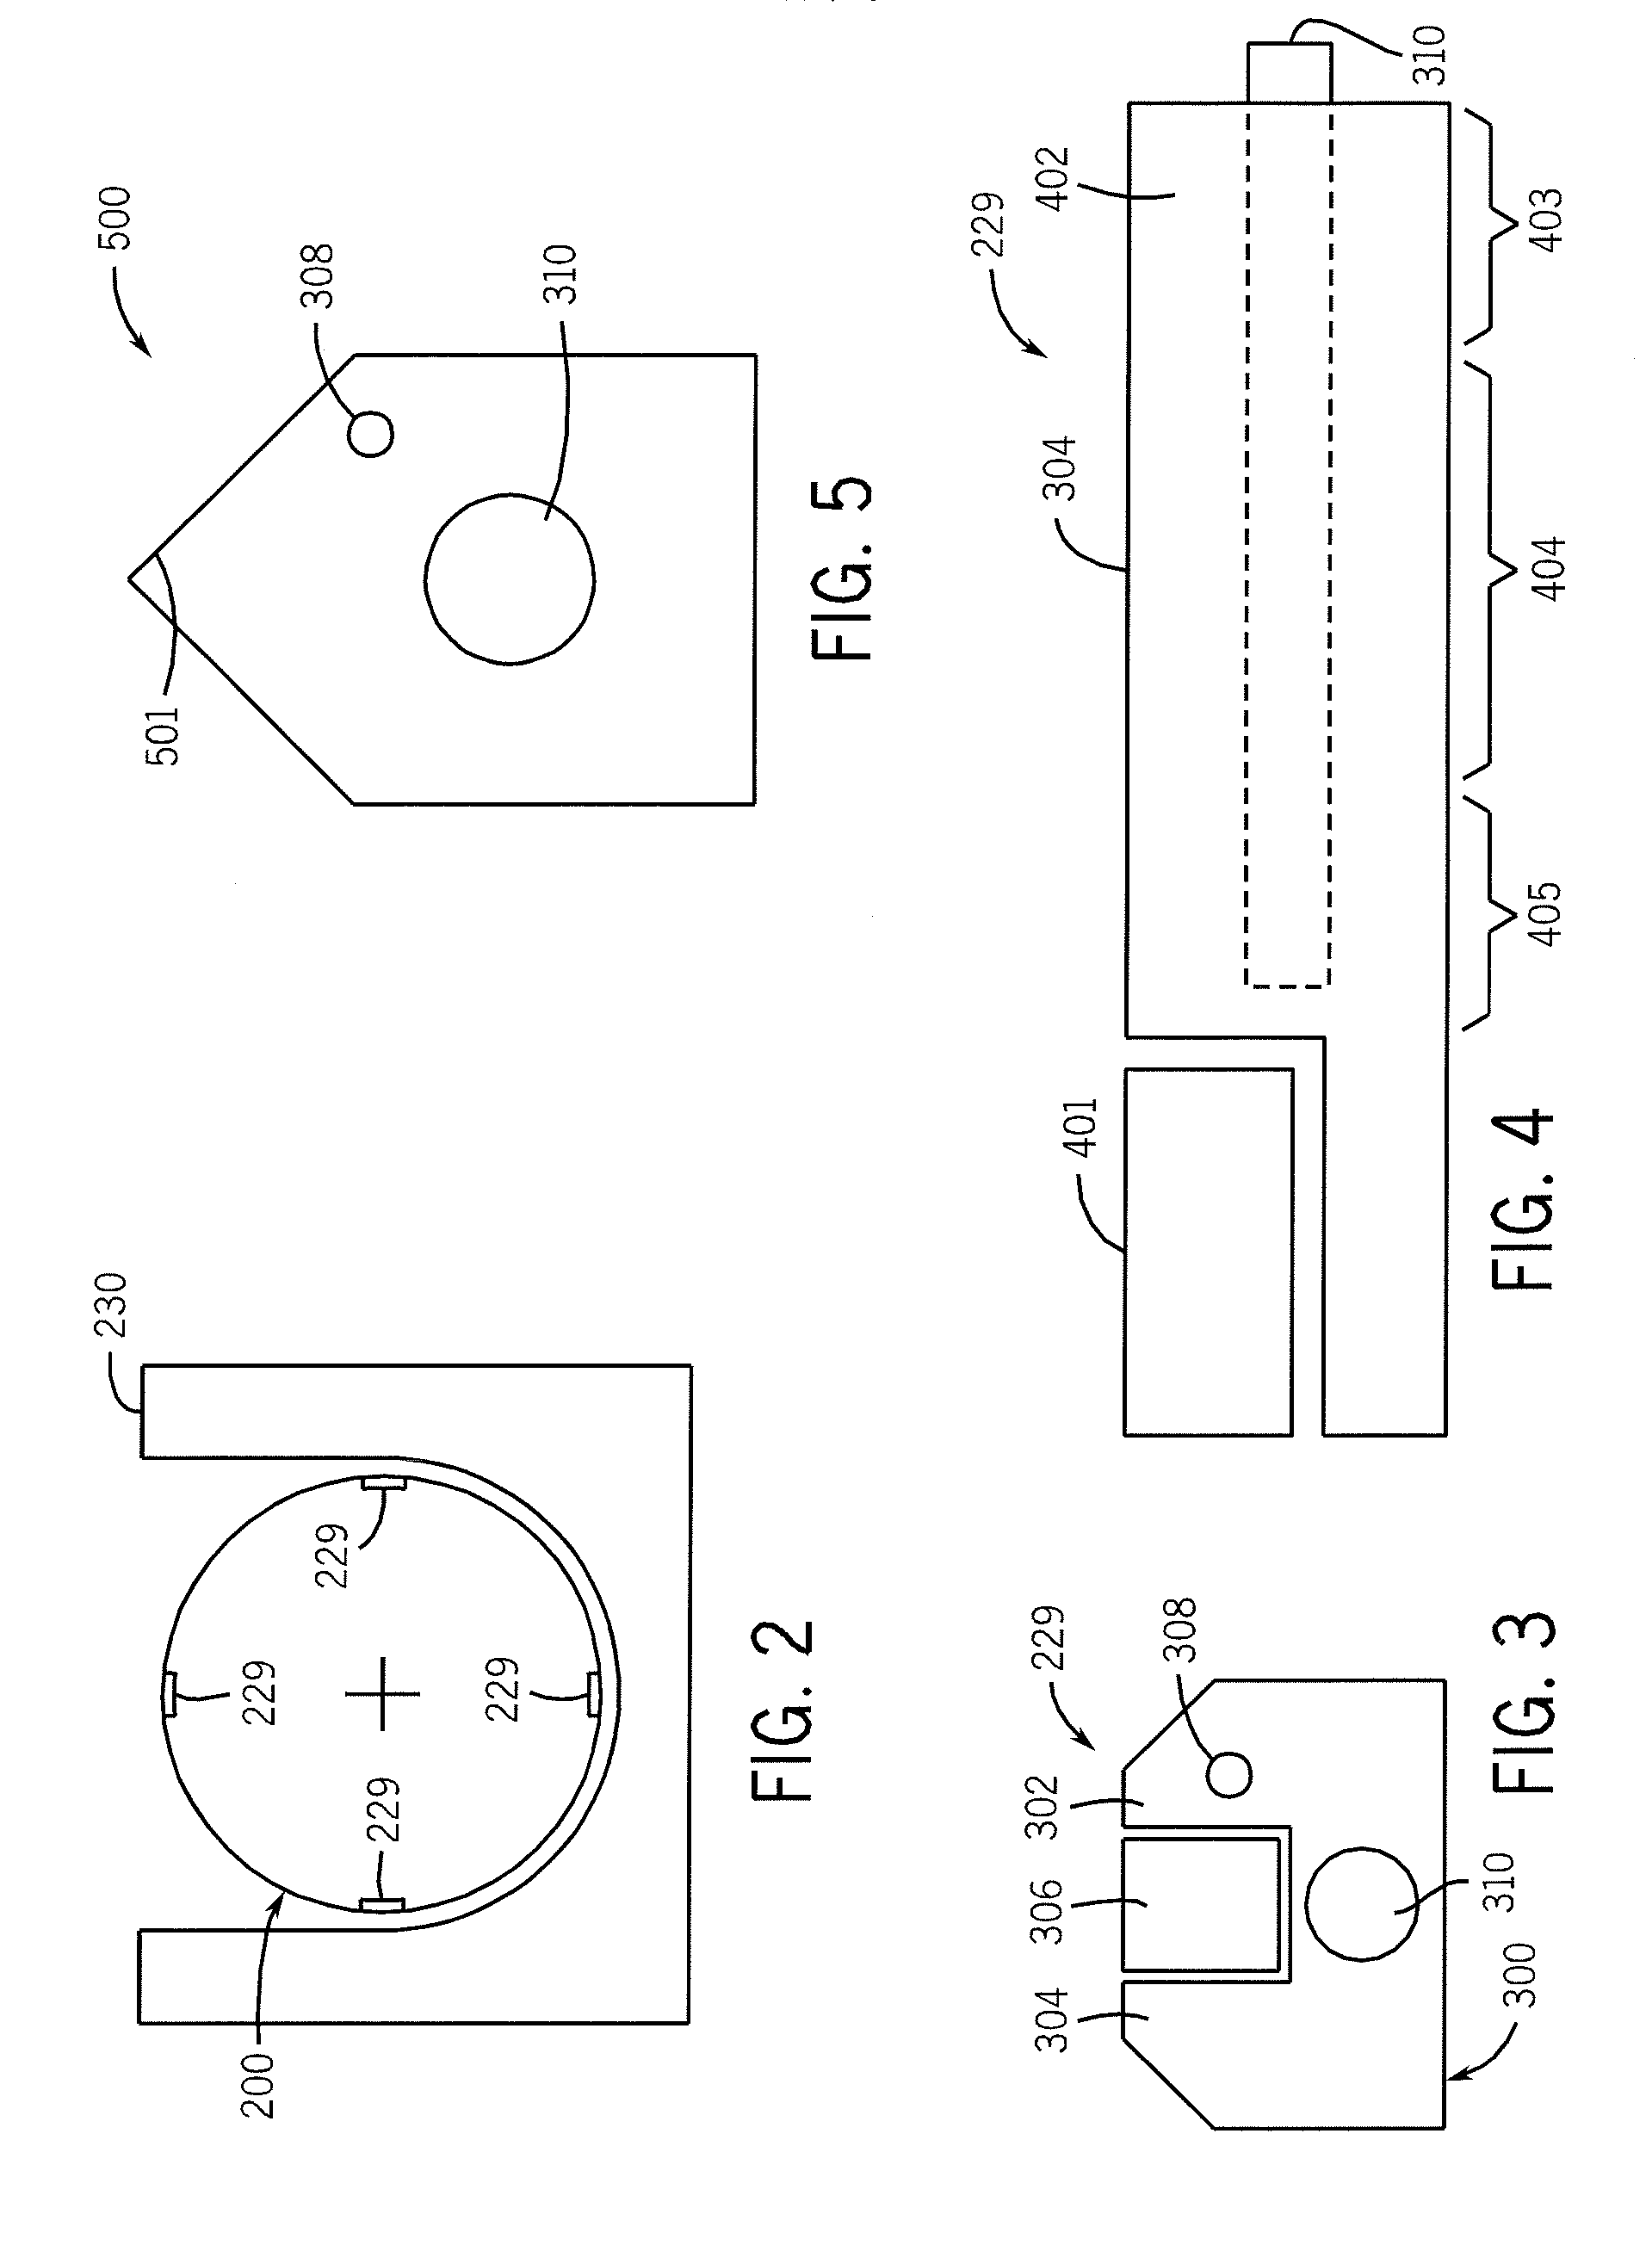 Method and apparatus for making bags